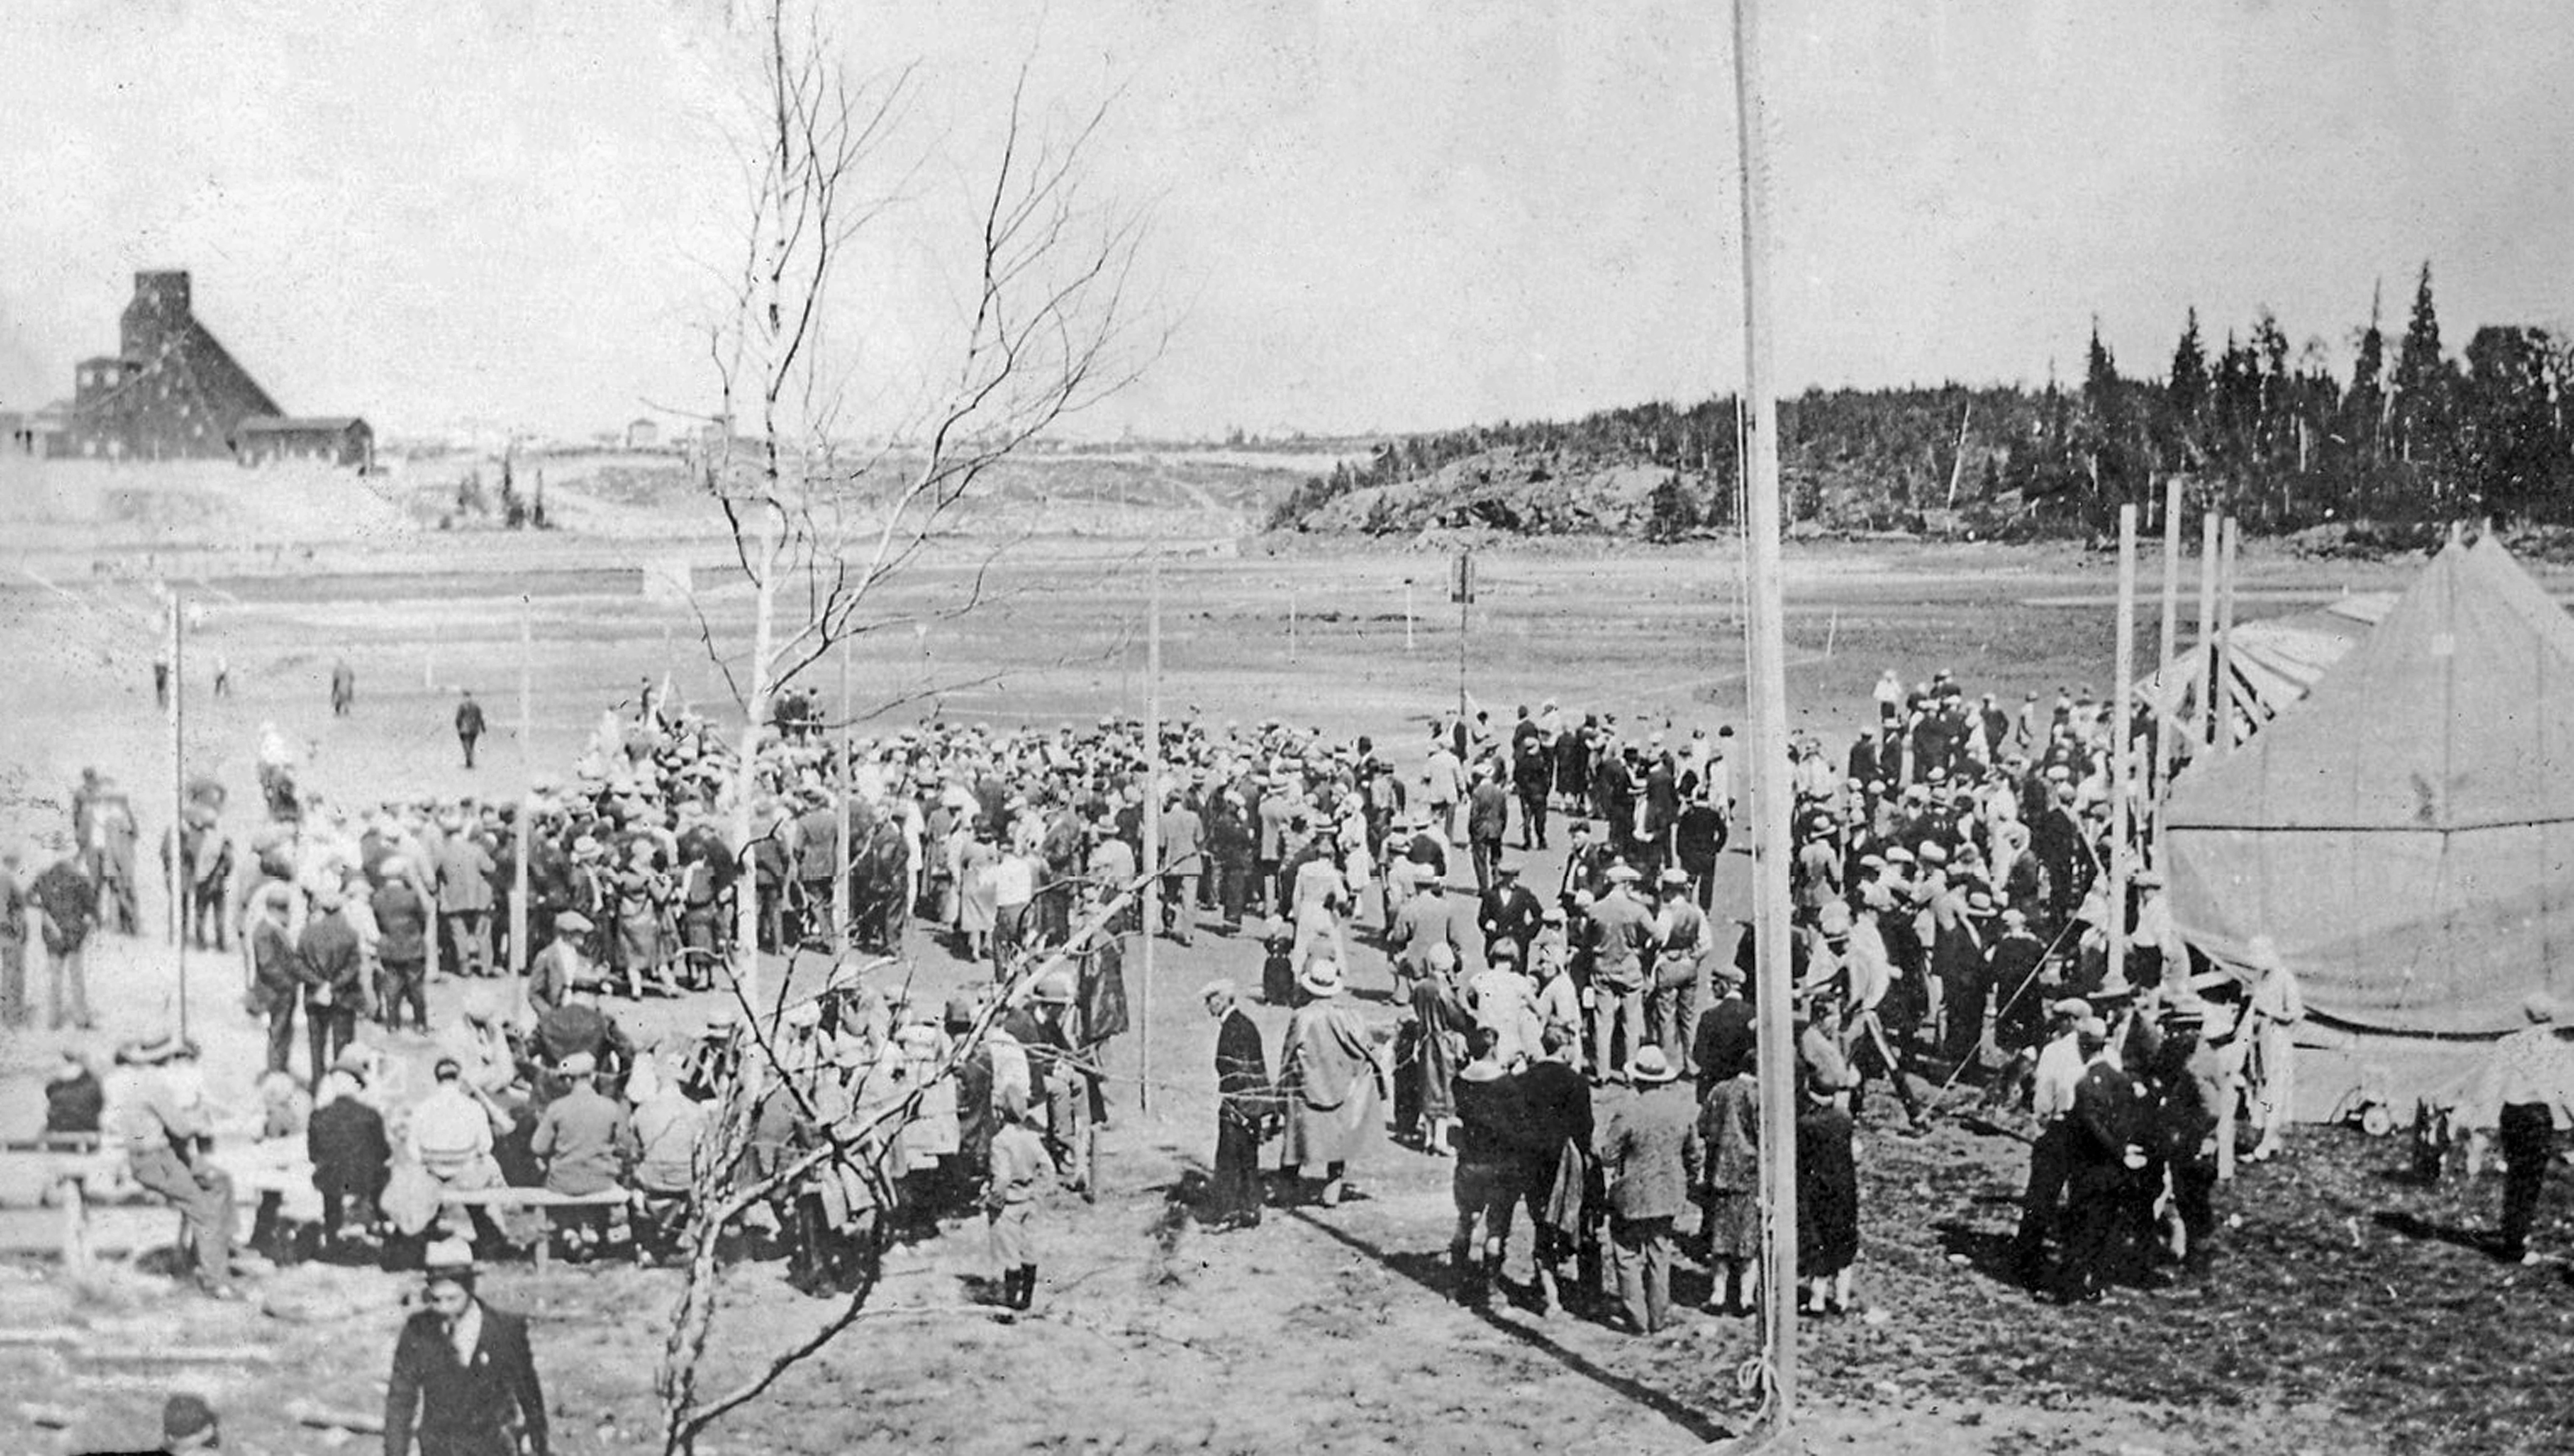 Group Gathering, on Pumped out Lake Bed , Main Shaft Visible in Background